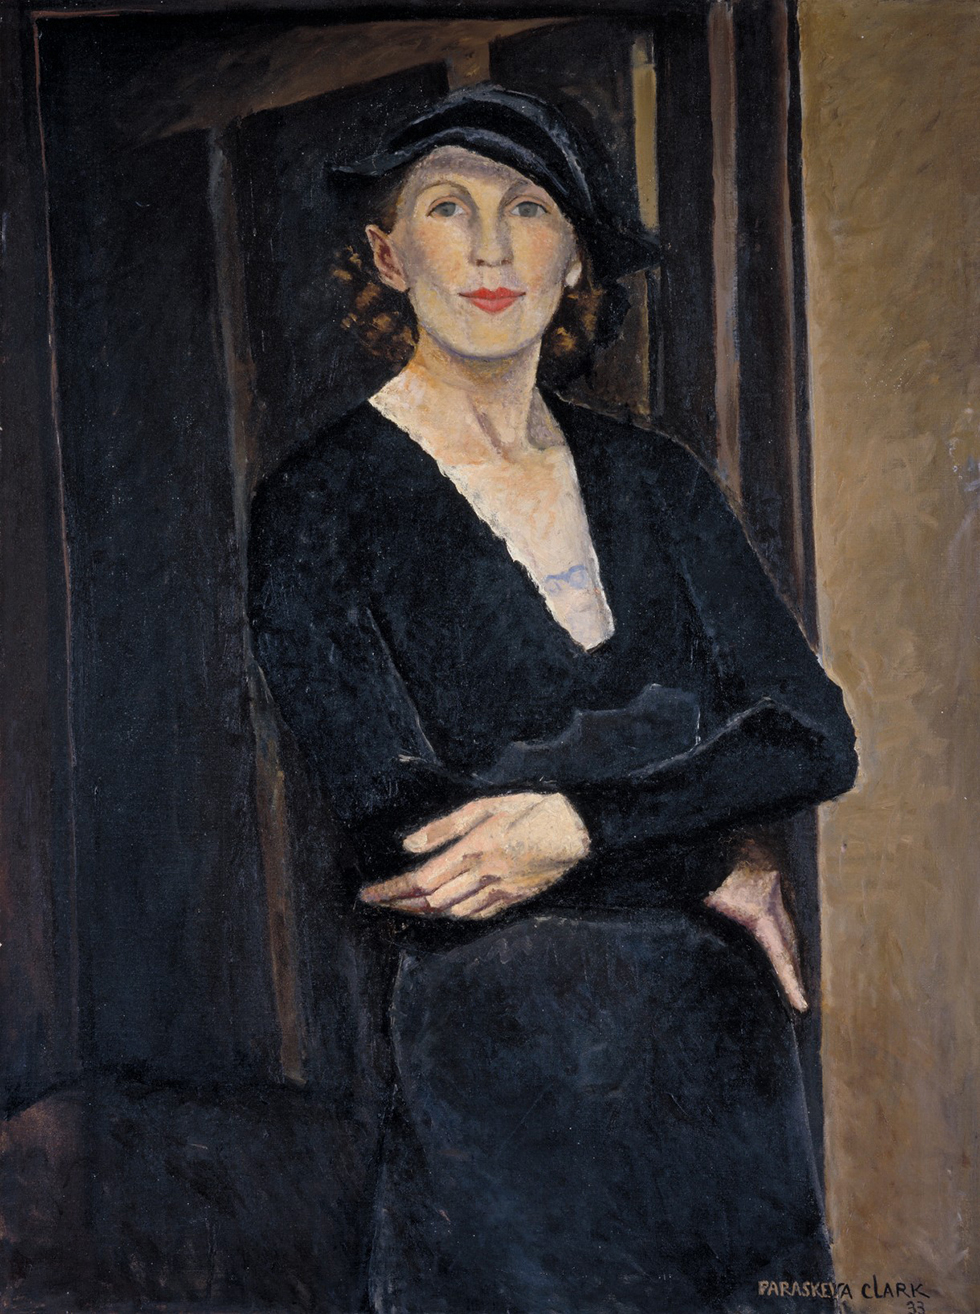 Paraskeva Clark, Myself, 1933, oil on canvas. National Gallery of Canada, Ottawa. Purchased 1974 (18311) Photo © NGC © Clive Clark, Estate of Paraskeva Clark. From the exhibition The Artist Herself: Self-Portraits by Canadian Historical Women Artists,2 May–9 August 2015. Photo via The Agnes Etherington Art Centre.